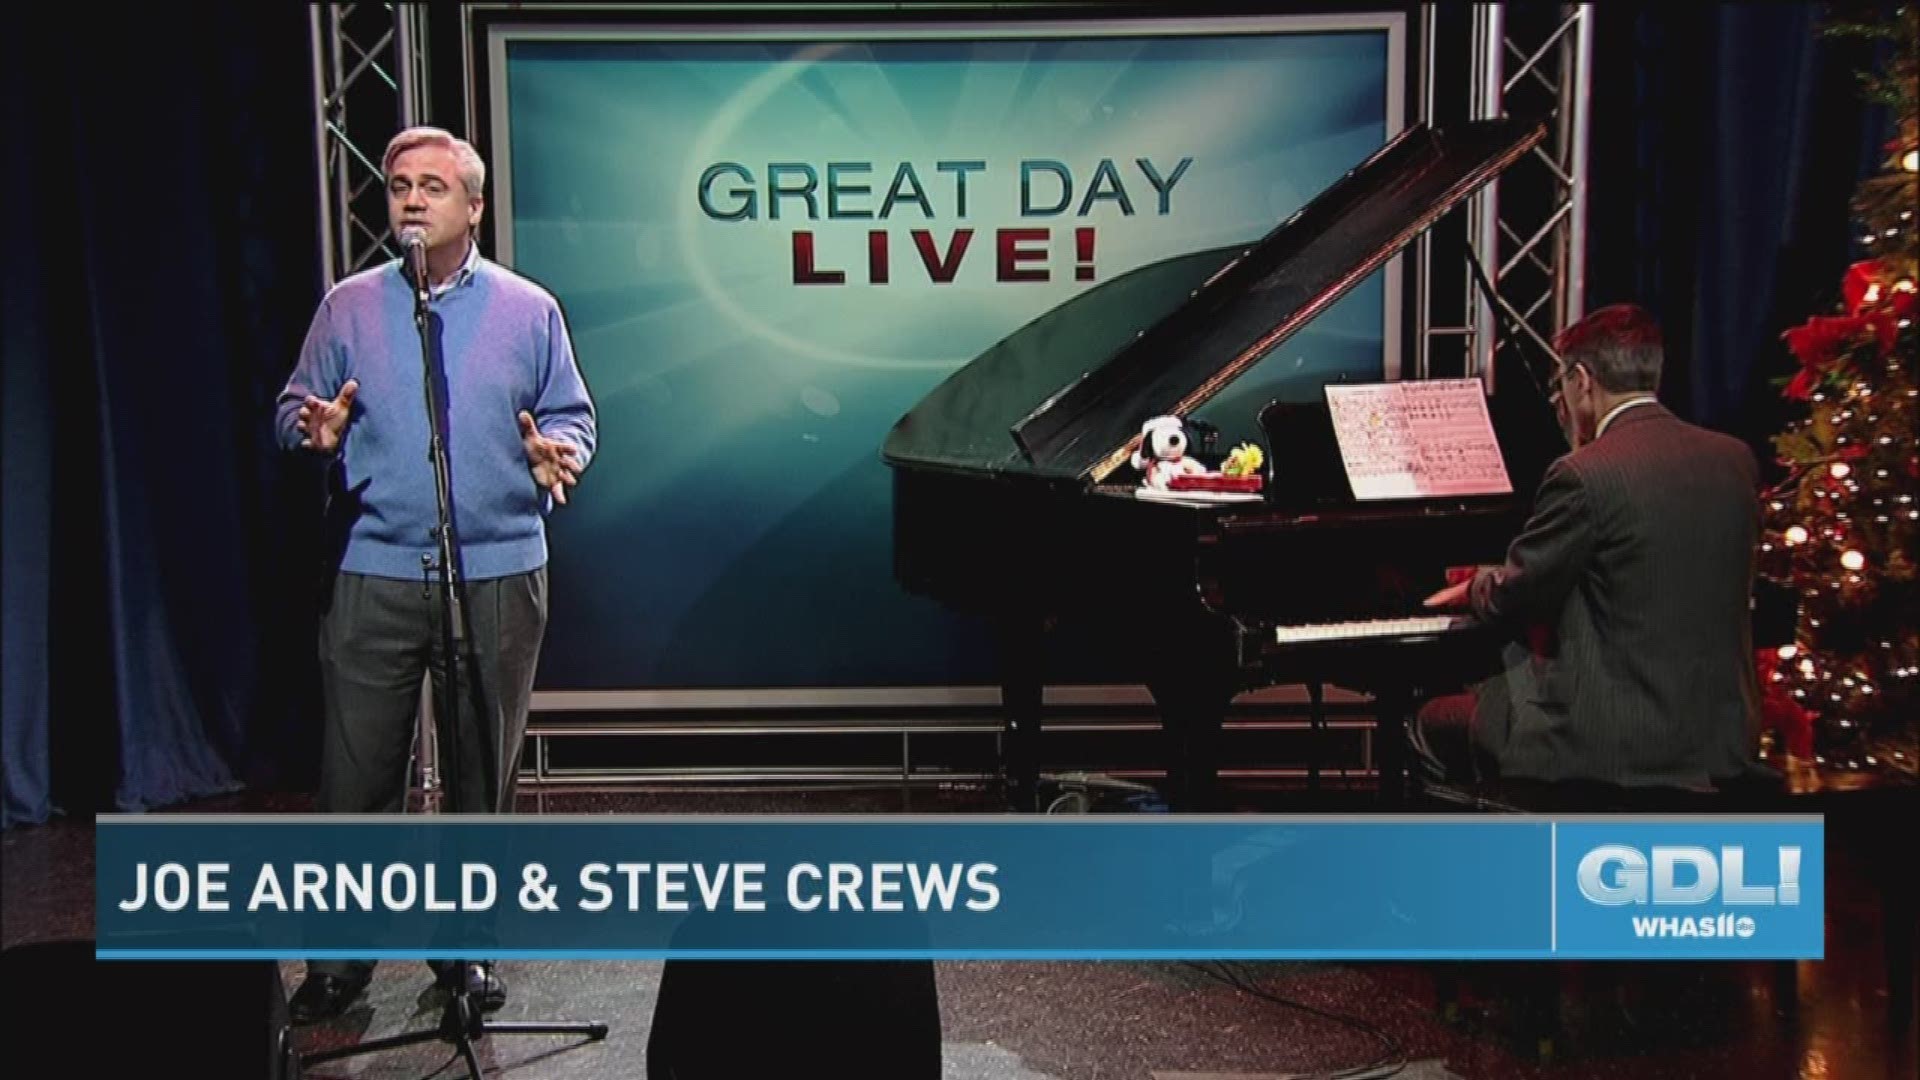 Every year during the holidays, Great Day Live invites one of our favorite duos to the show to spread a little Christmas cheer throughout the studio. Former WHAS11 employee and songbird Joe Arnold stopped by with pianist Steve Crews to play some holiday c